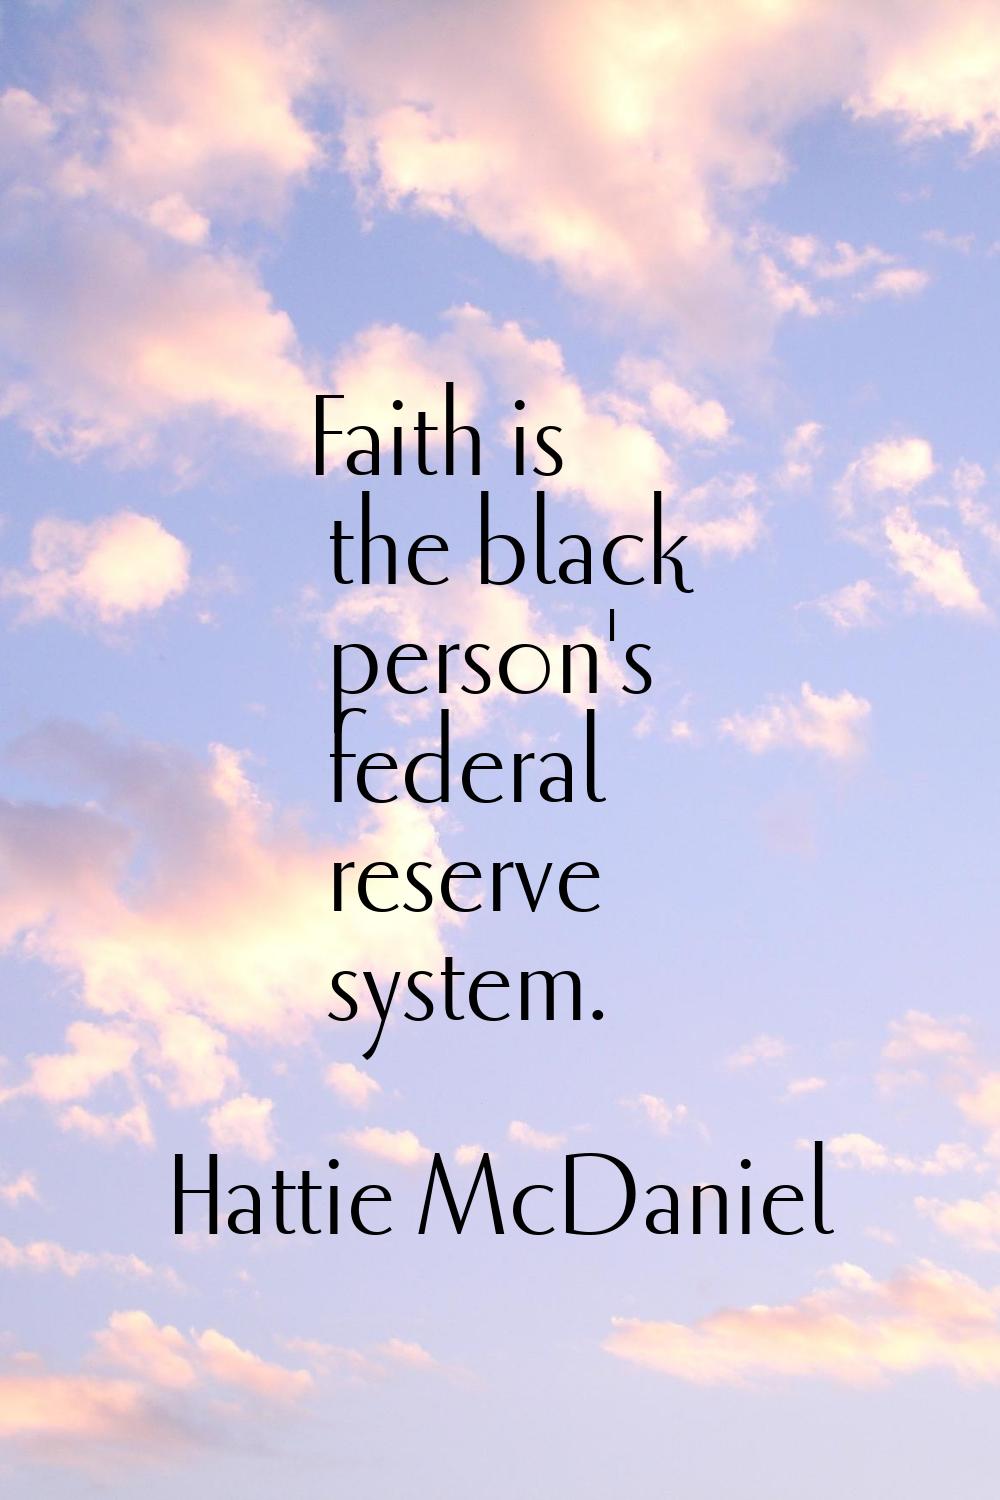 Faith is the black person's federal reserve system.